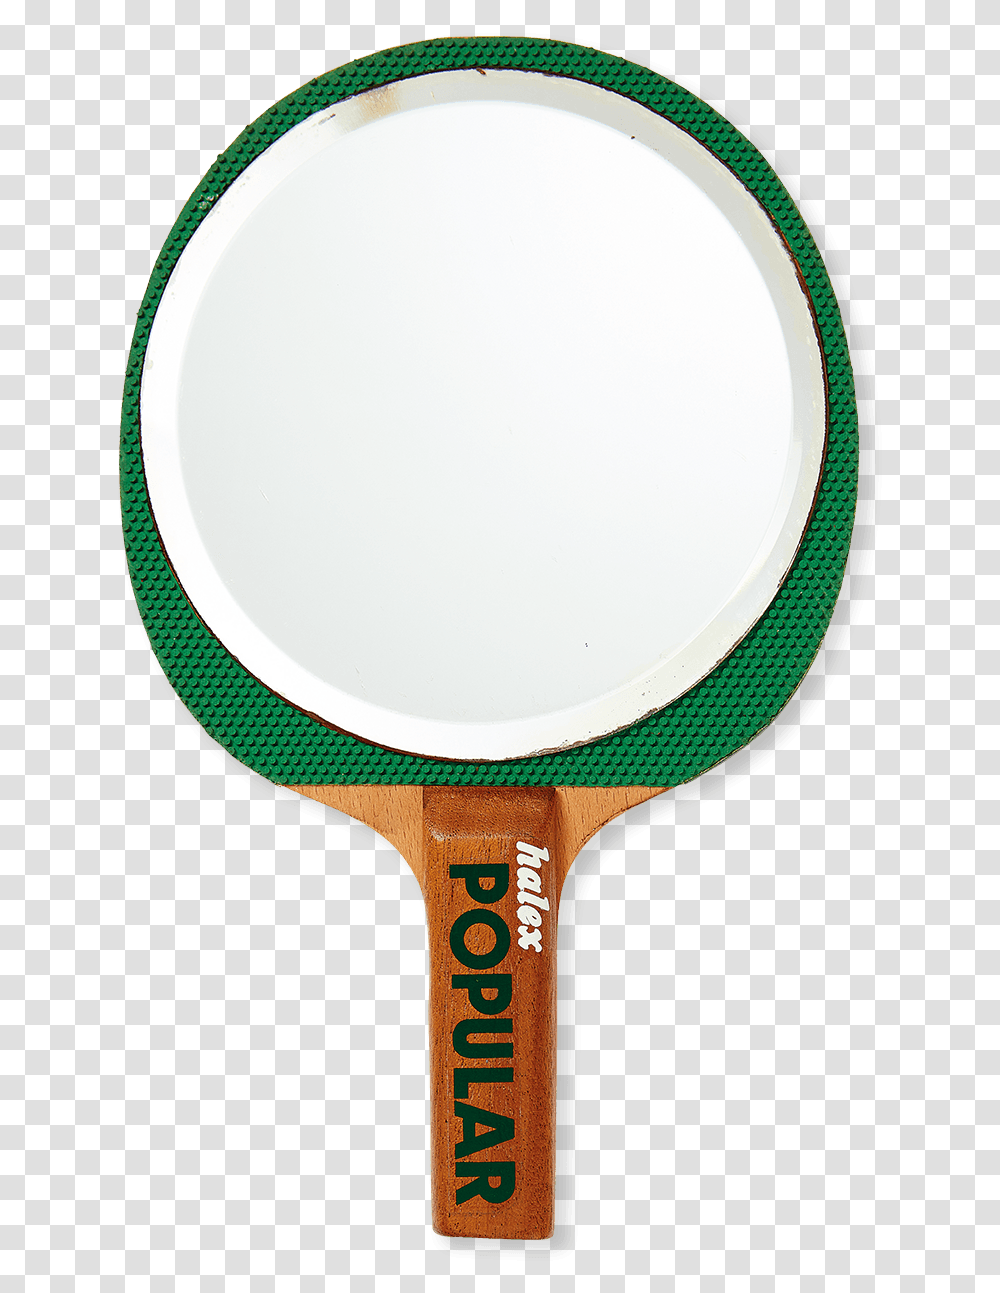 Table Tennis Racket Clipart Download, Tape, Mirror Transparent Png